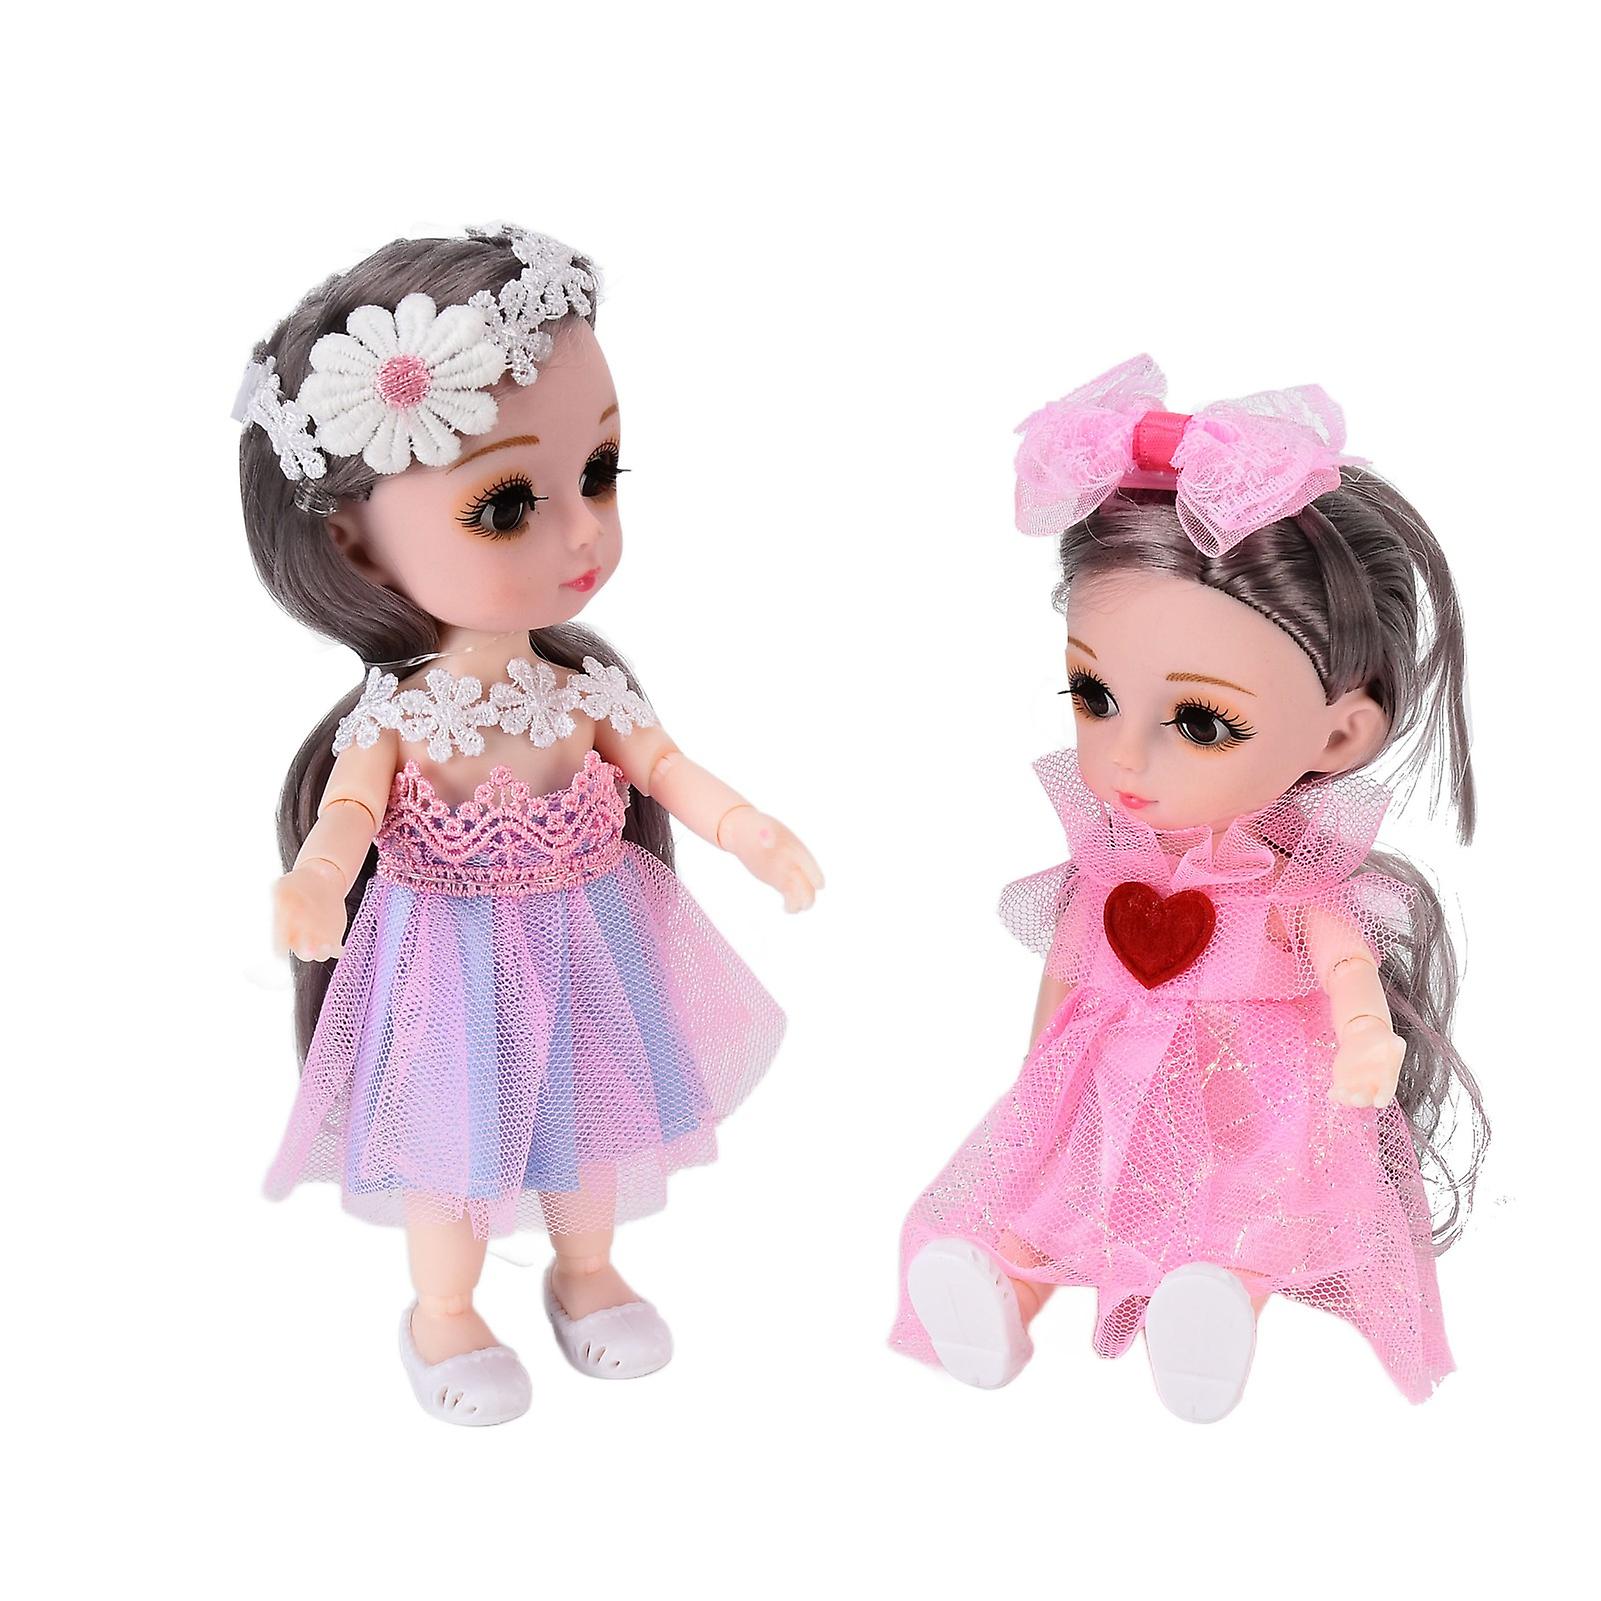 2pcs Girl Doll Toys Movable Joints Beautiful Diy Dress Up Dolls With Hairpin Shoes For Above 3 Years Old